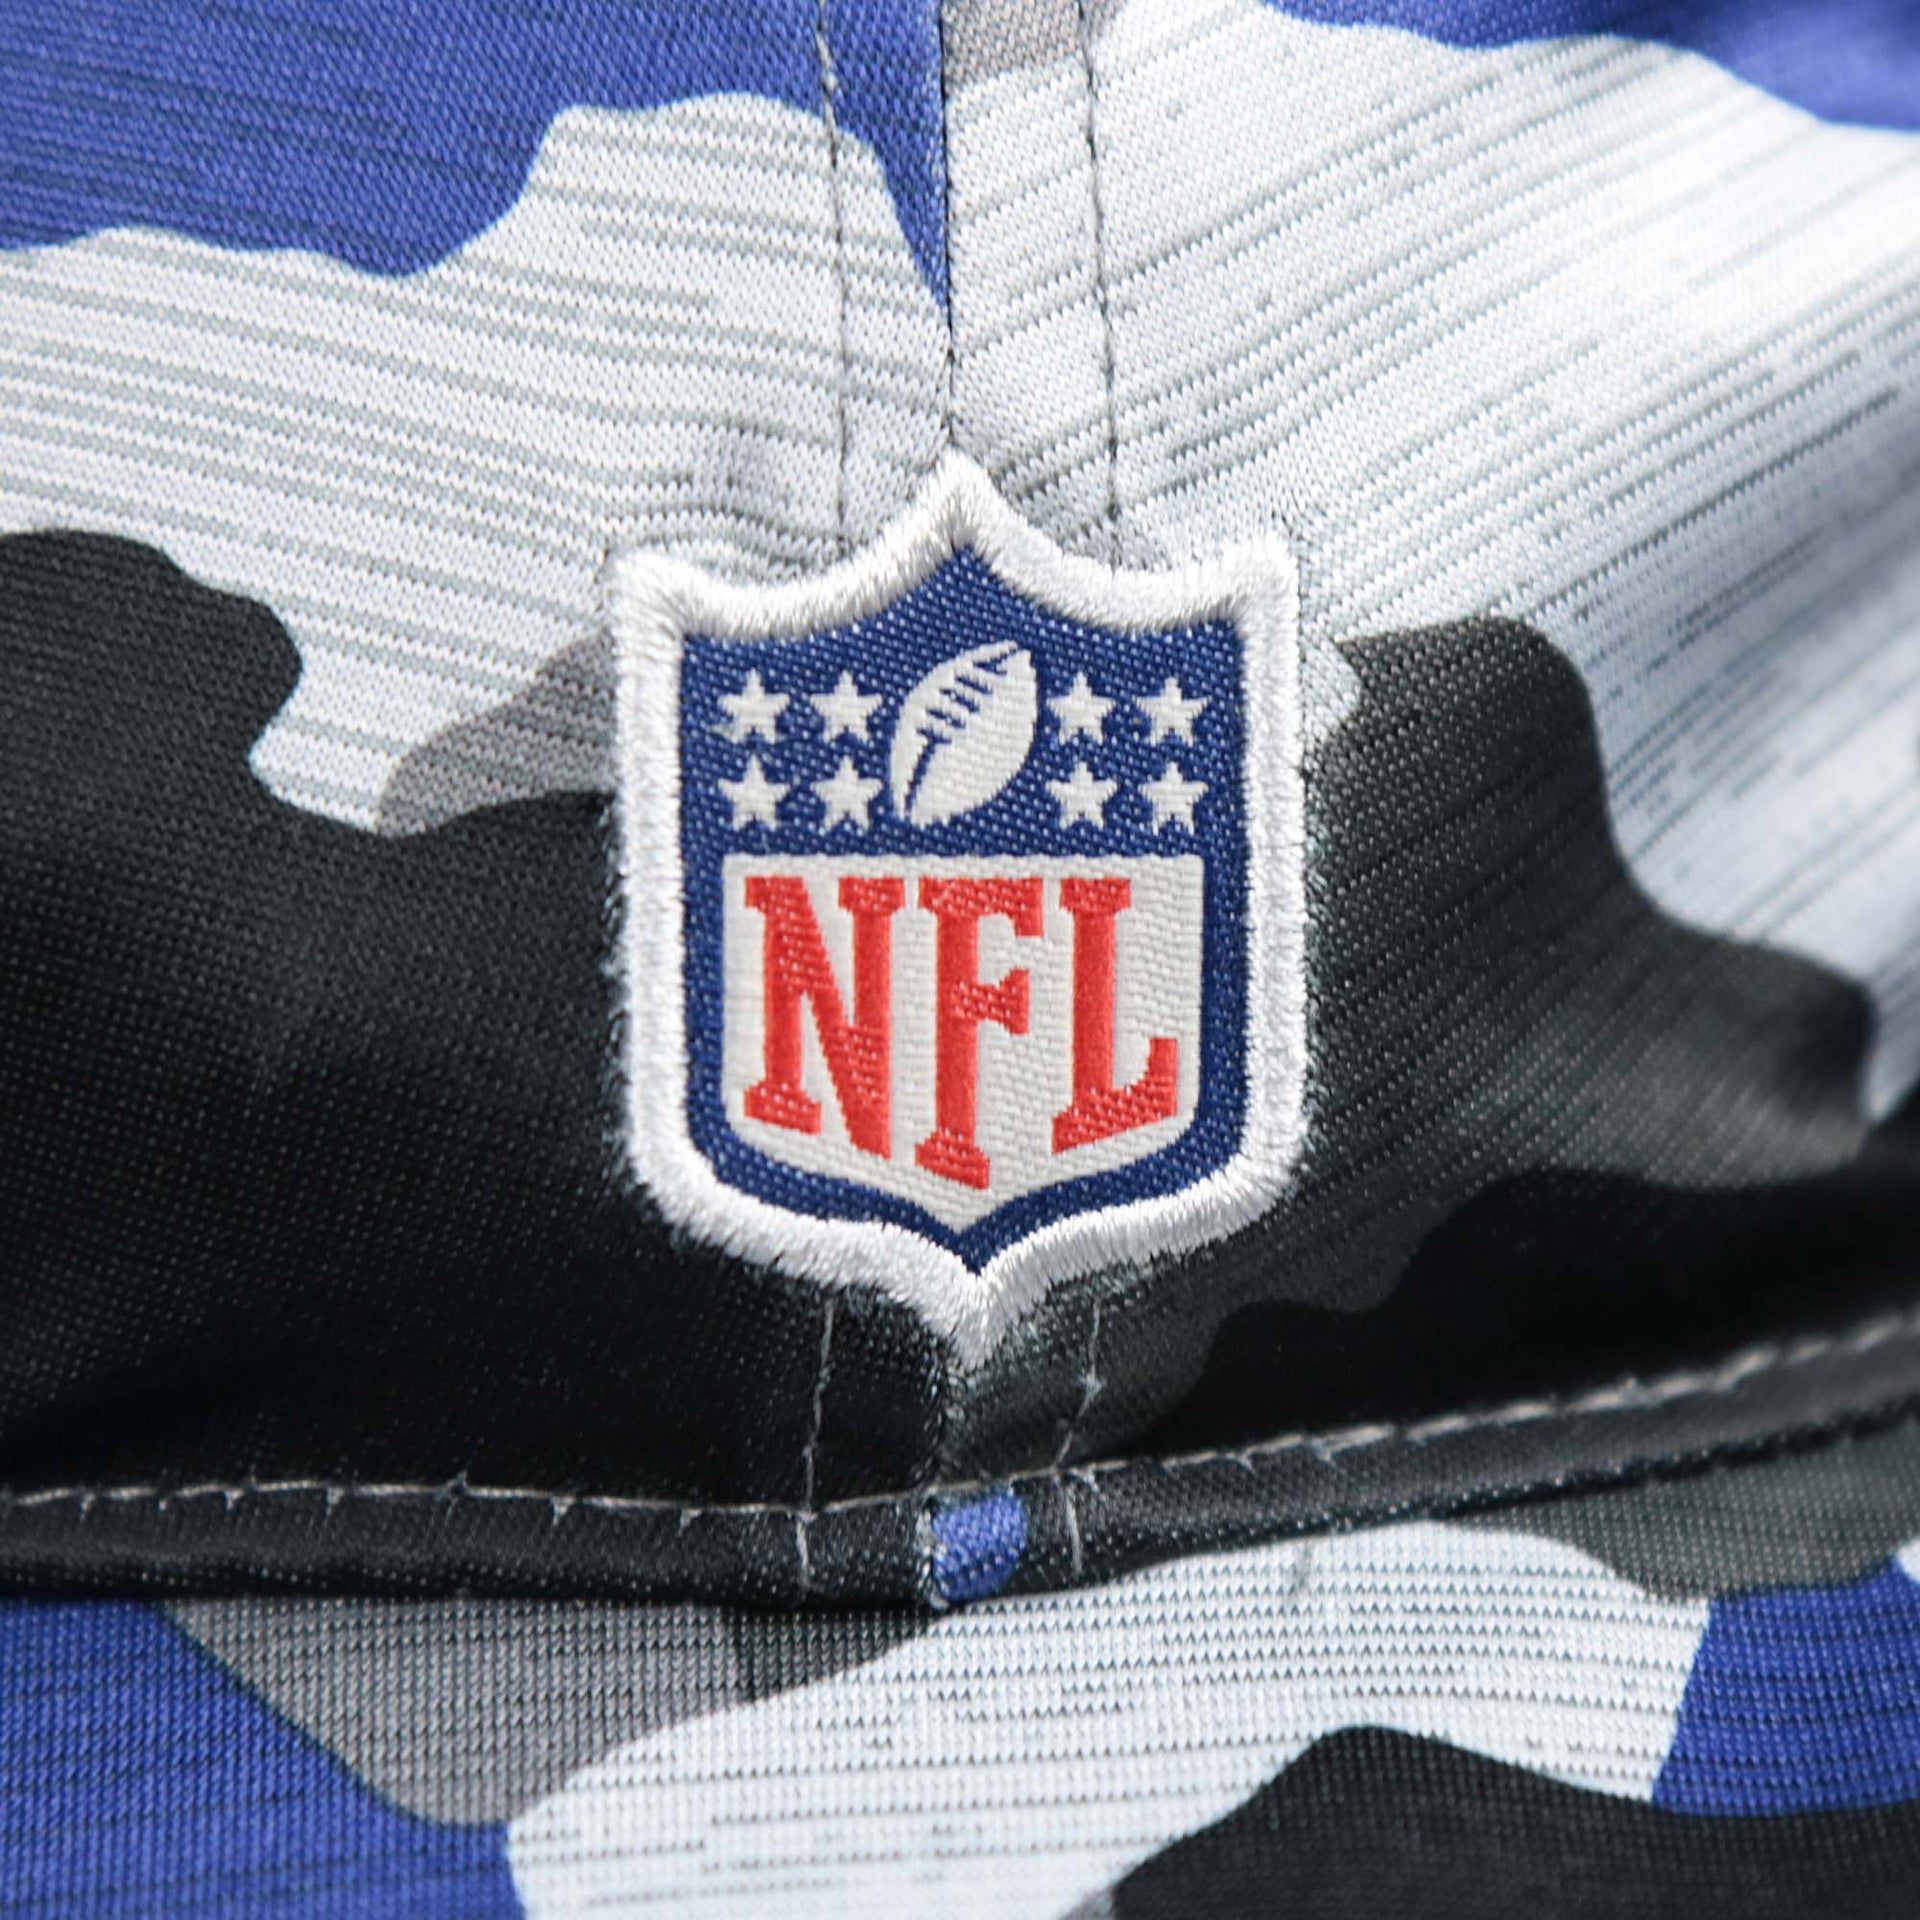 The NFL Logo Embroidered on the